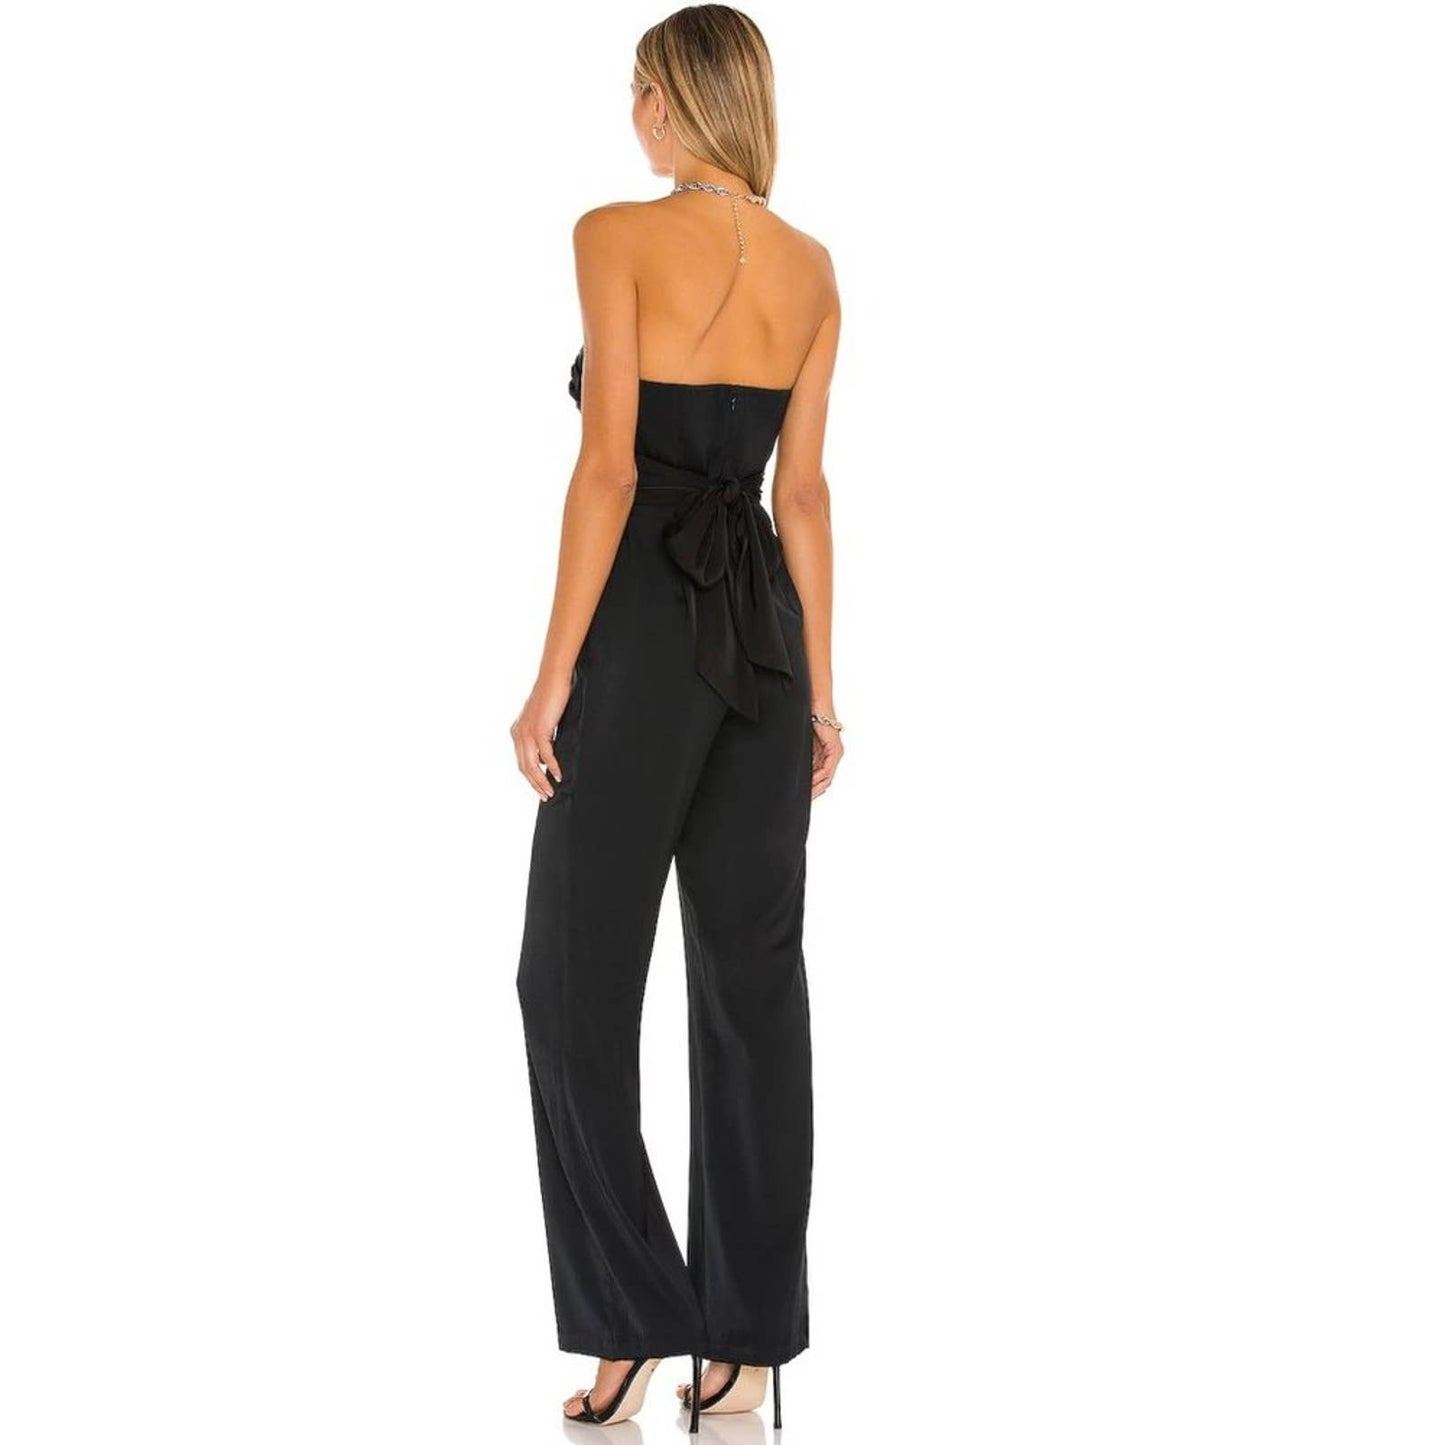 Michael Costello x REVOLVE Amber Jumpsuit NWT Size Small